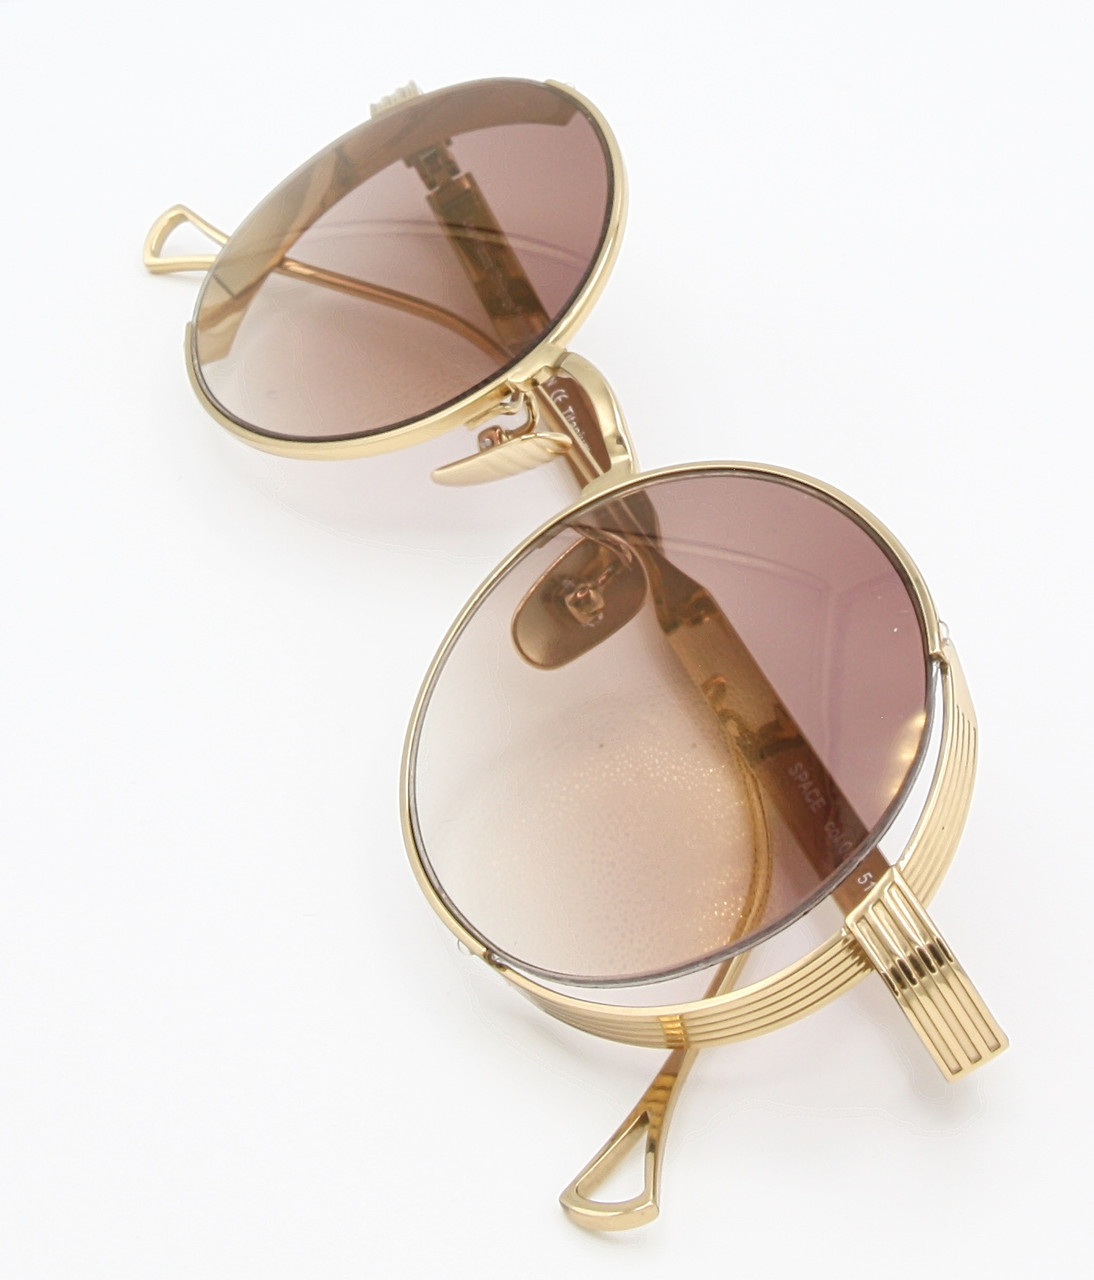 Stunning Sunglasses By Les Pieces Uniques SPACE Titanium Oval Eyewear In A Gold Finish